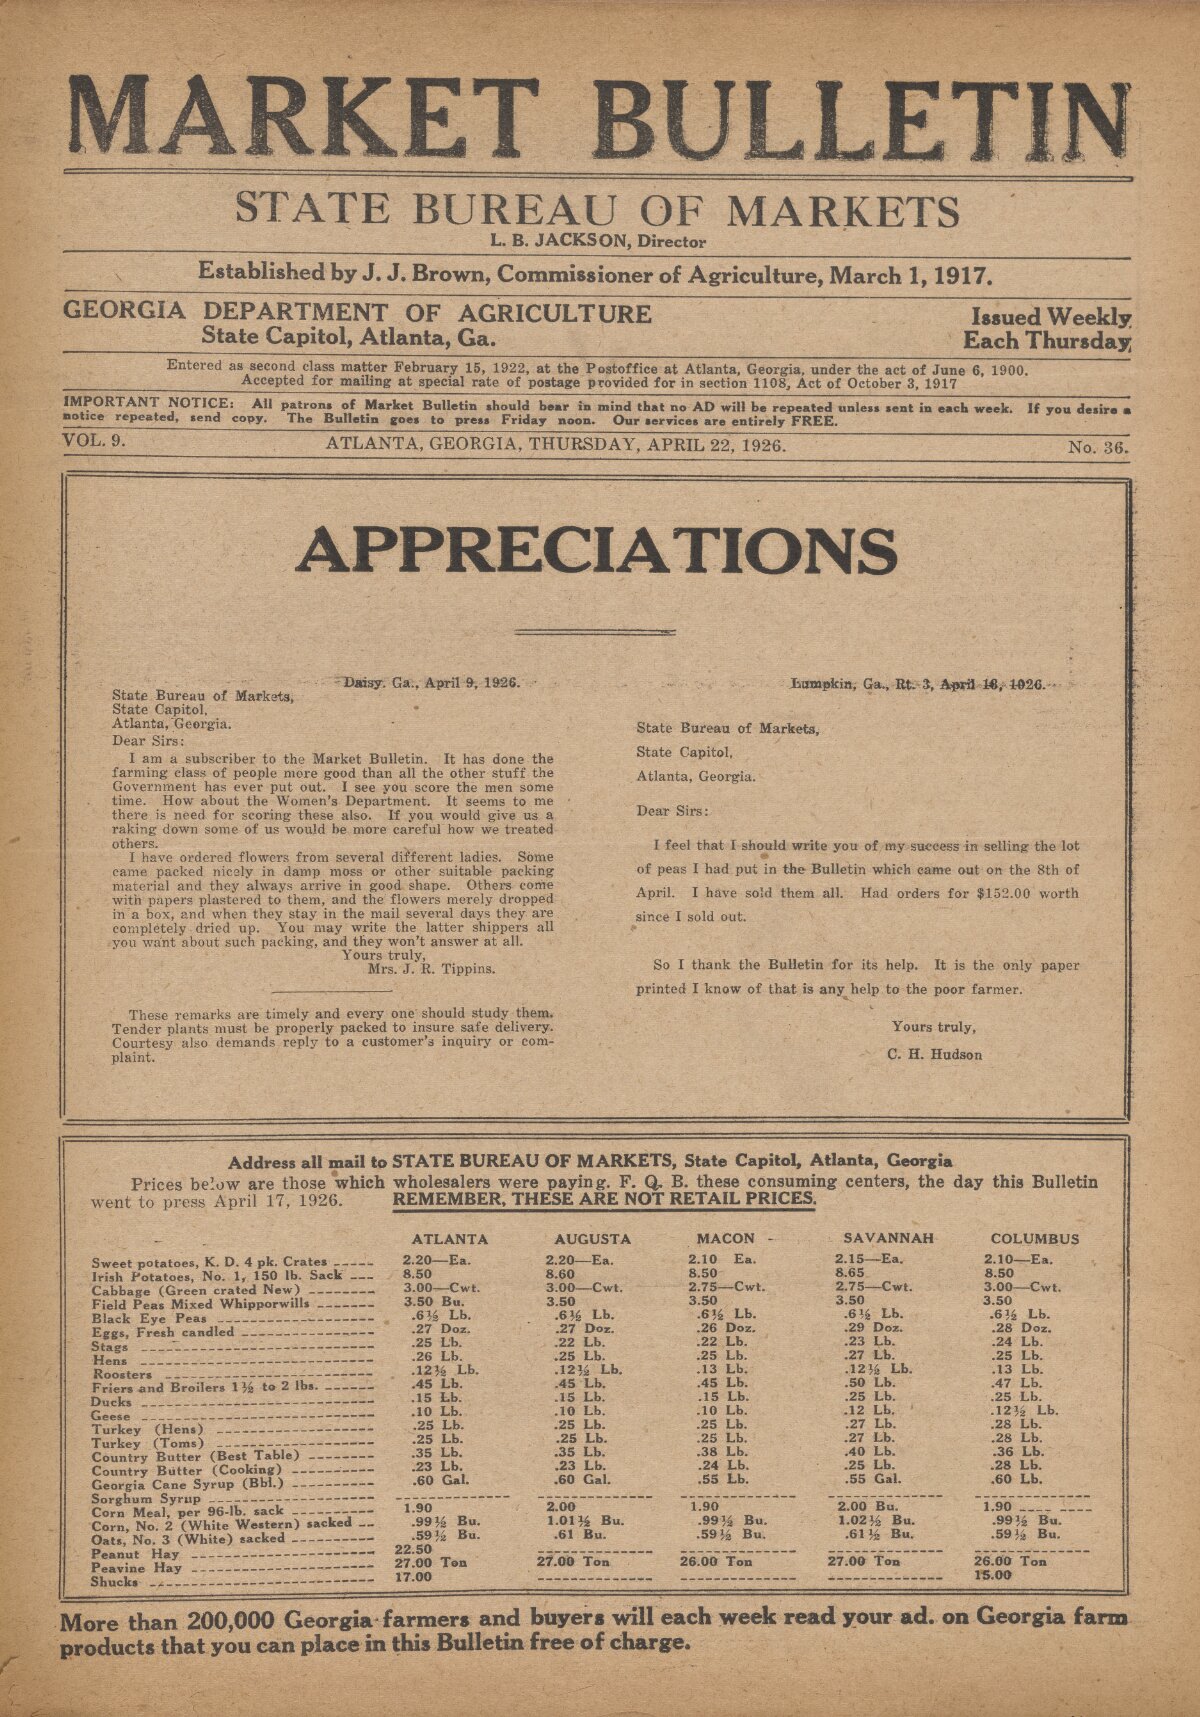 Farmers and consumers market bulletin, 1926 April 22 picture image